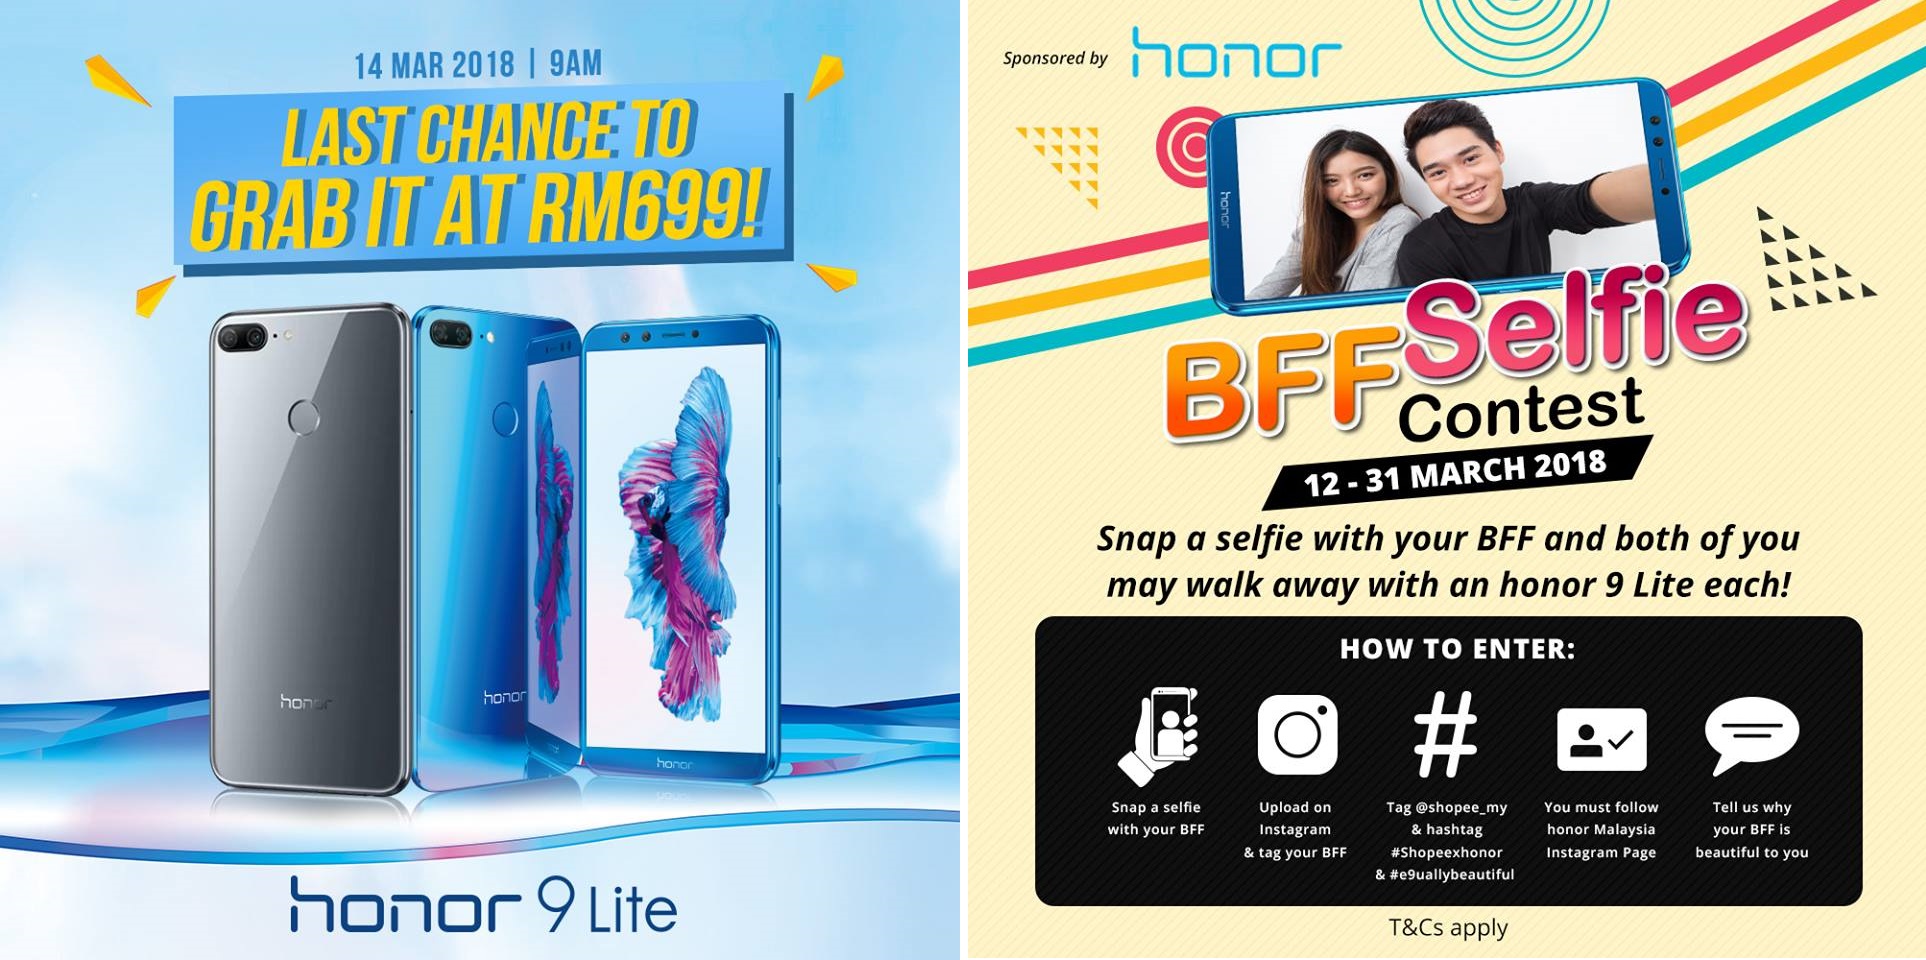 Another honor 9 Lite Shocking Sale promo this Wednesday + New a BFF Selfie Contest to win a free phone